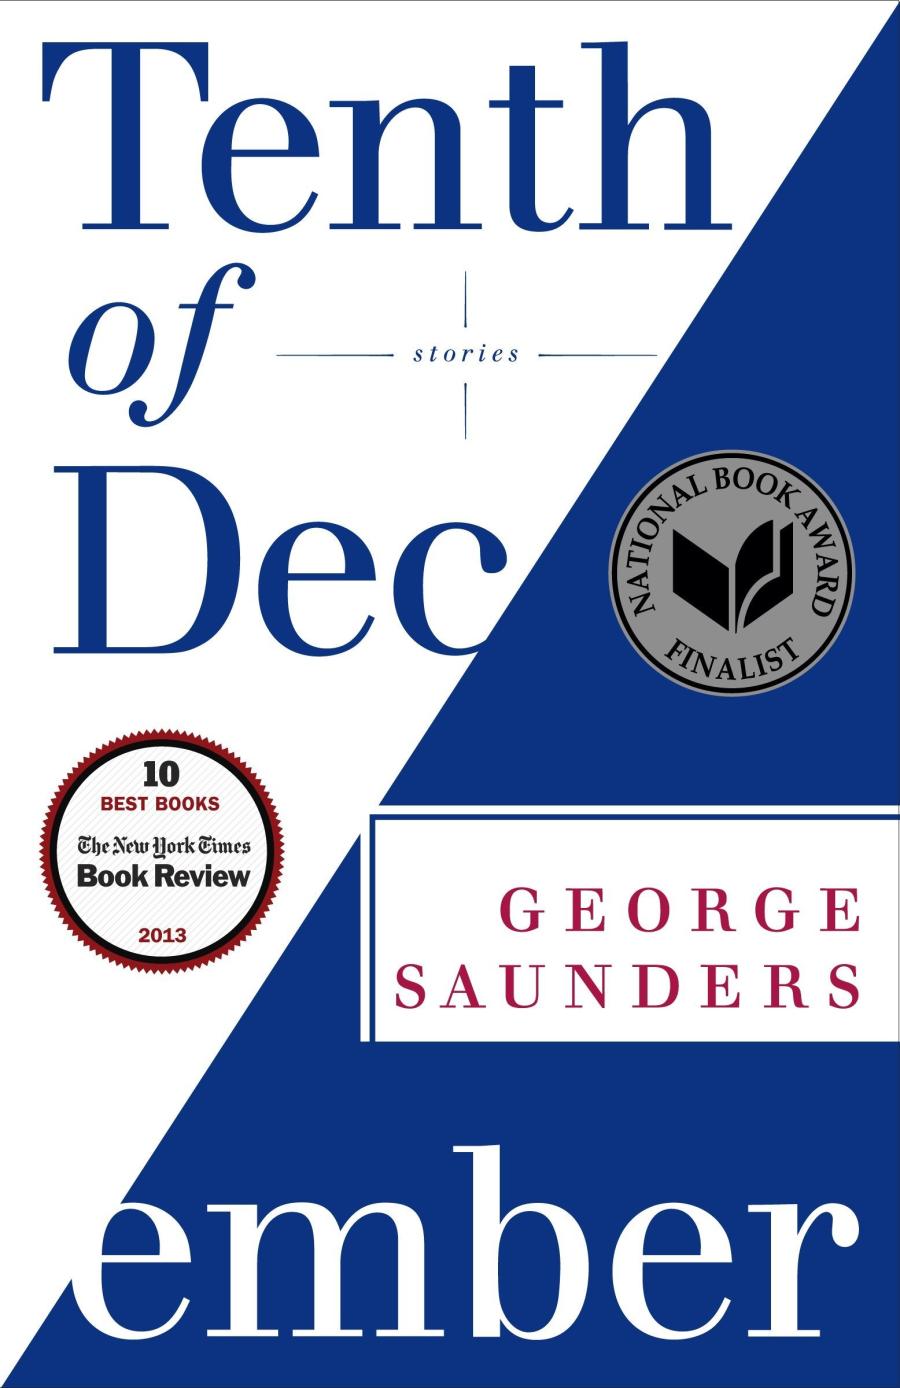 Cover image of George Saunder's book Tenth of December